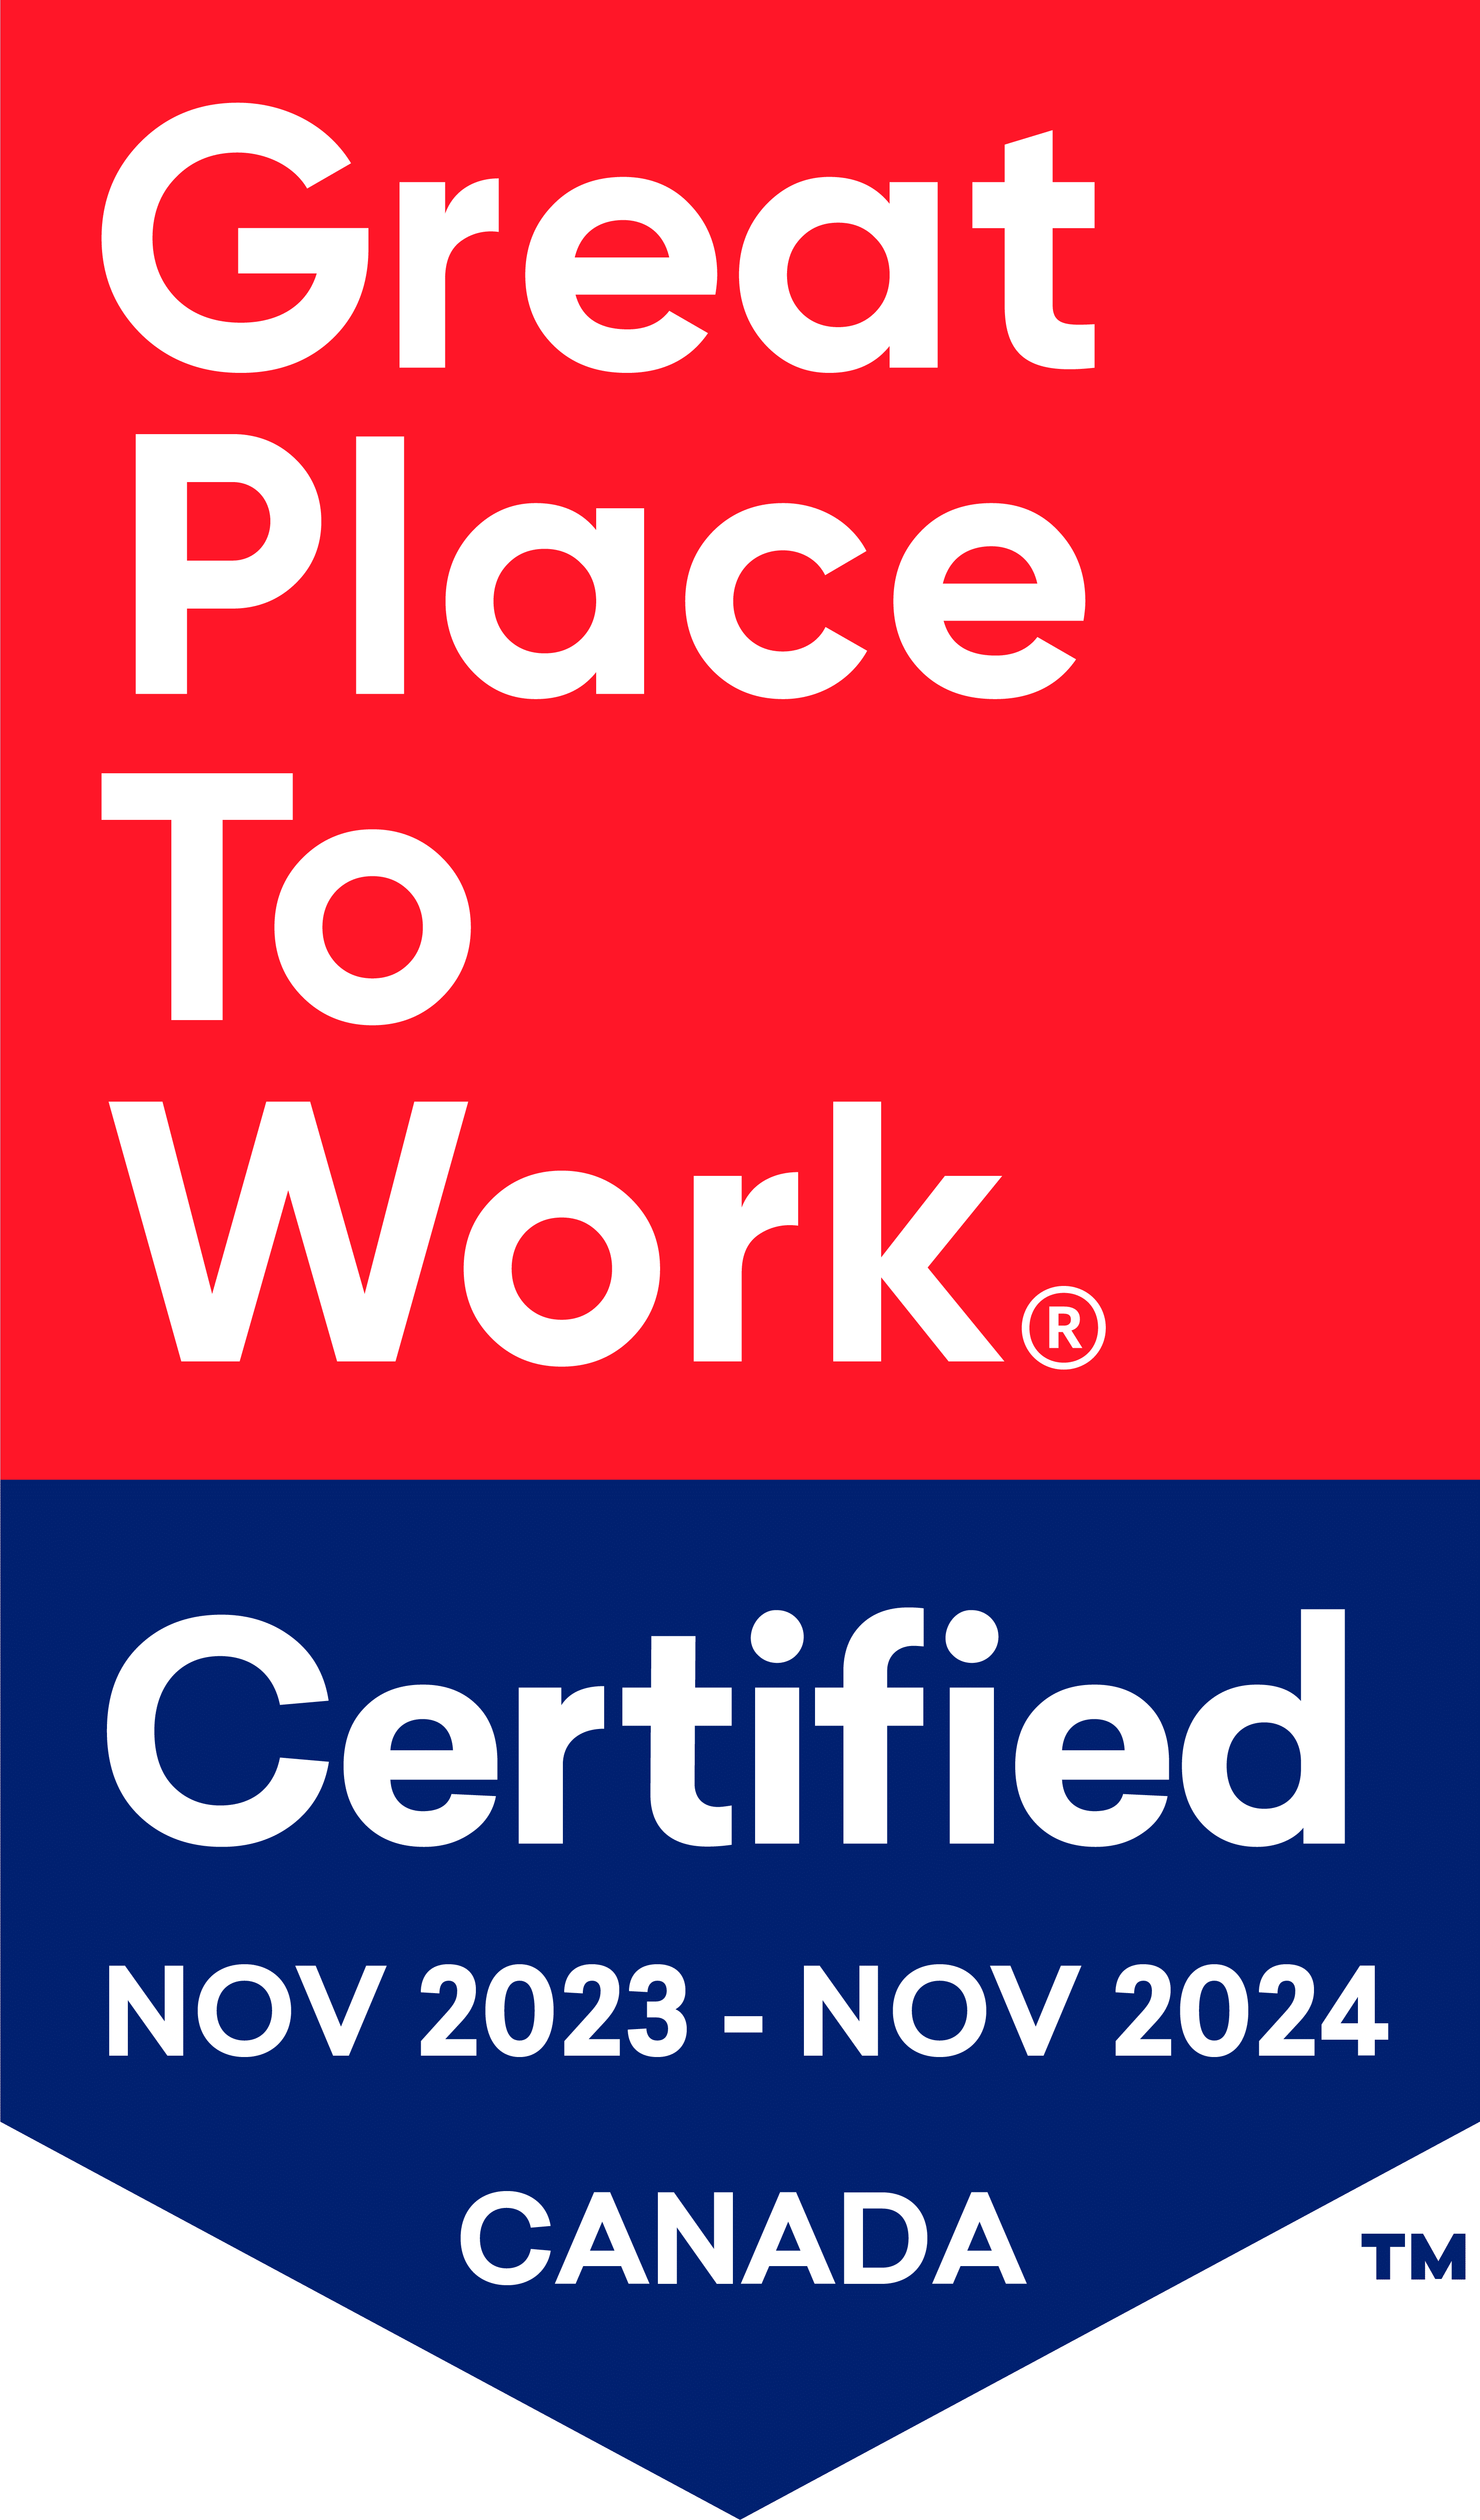 Great place to work certified Canada